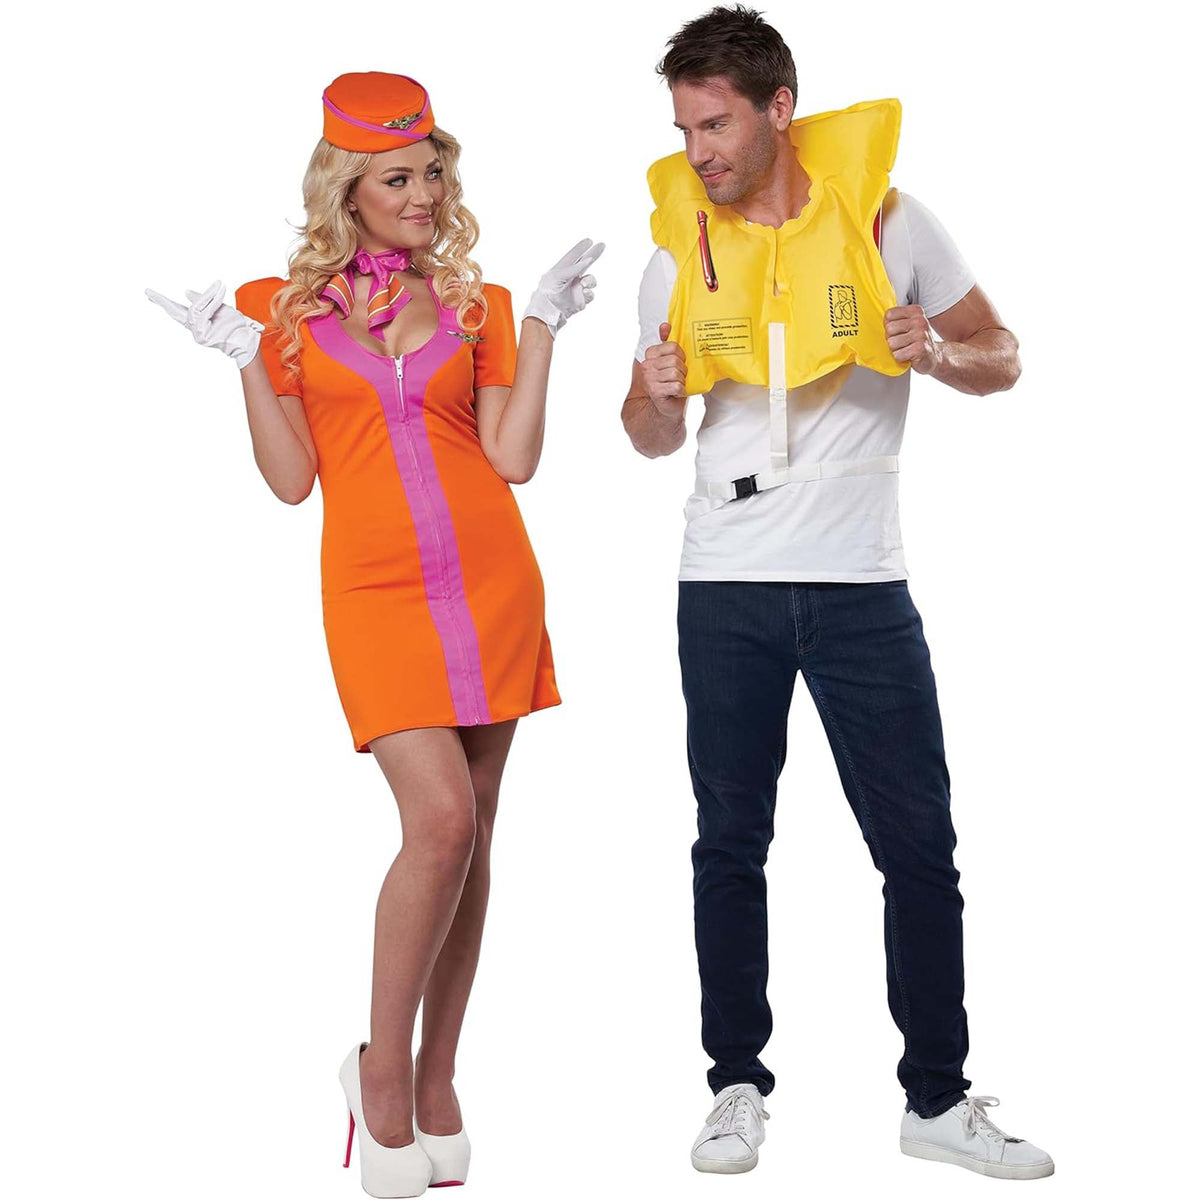 CALIFORNIA COSTUMES Costumes Love is in the Air Couple Costume for Adults